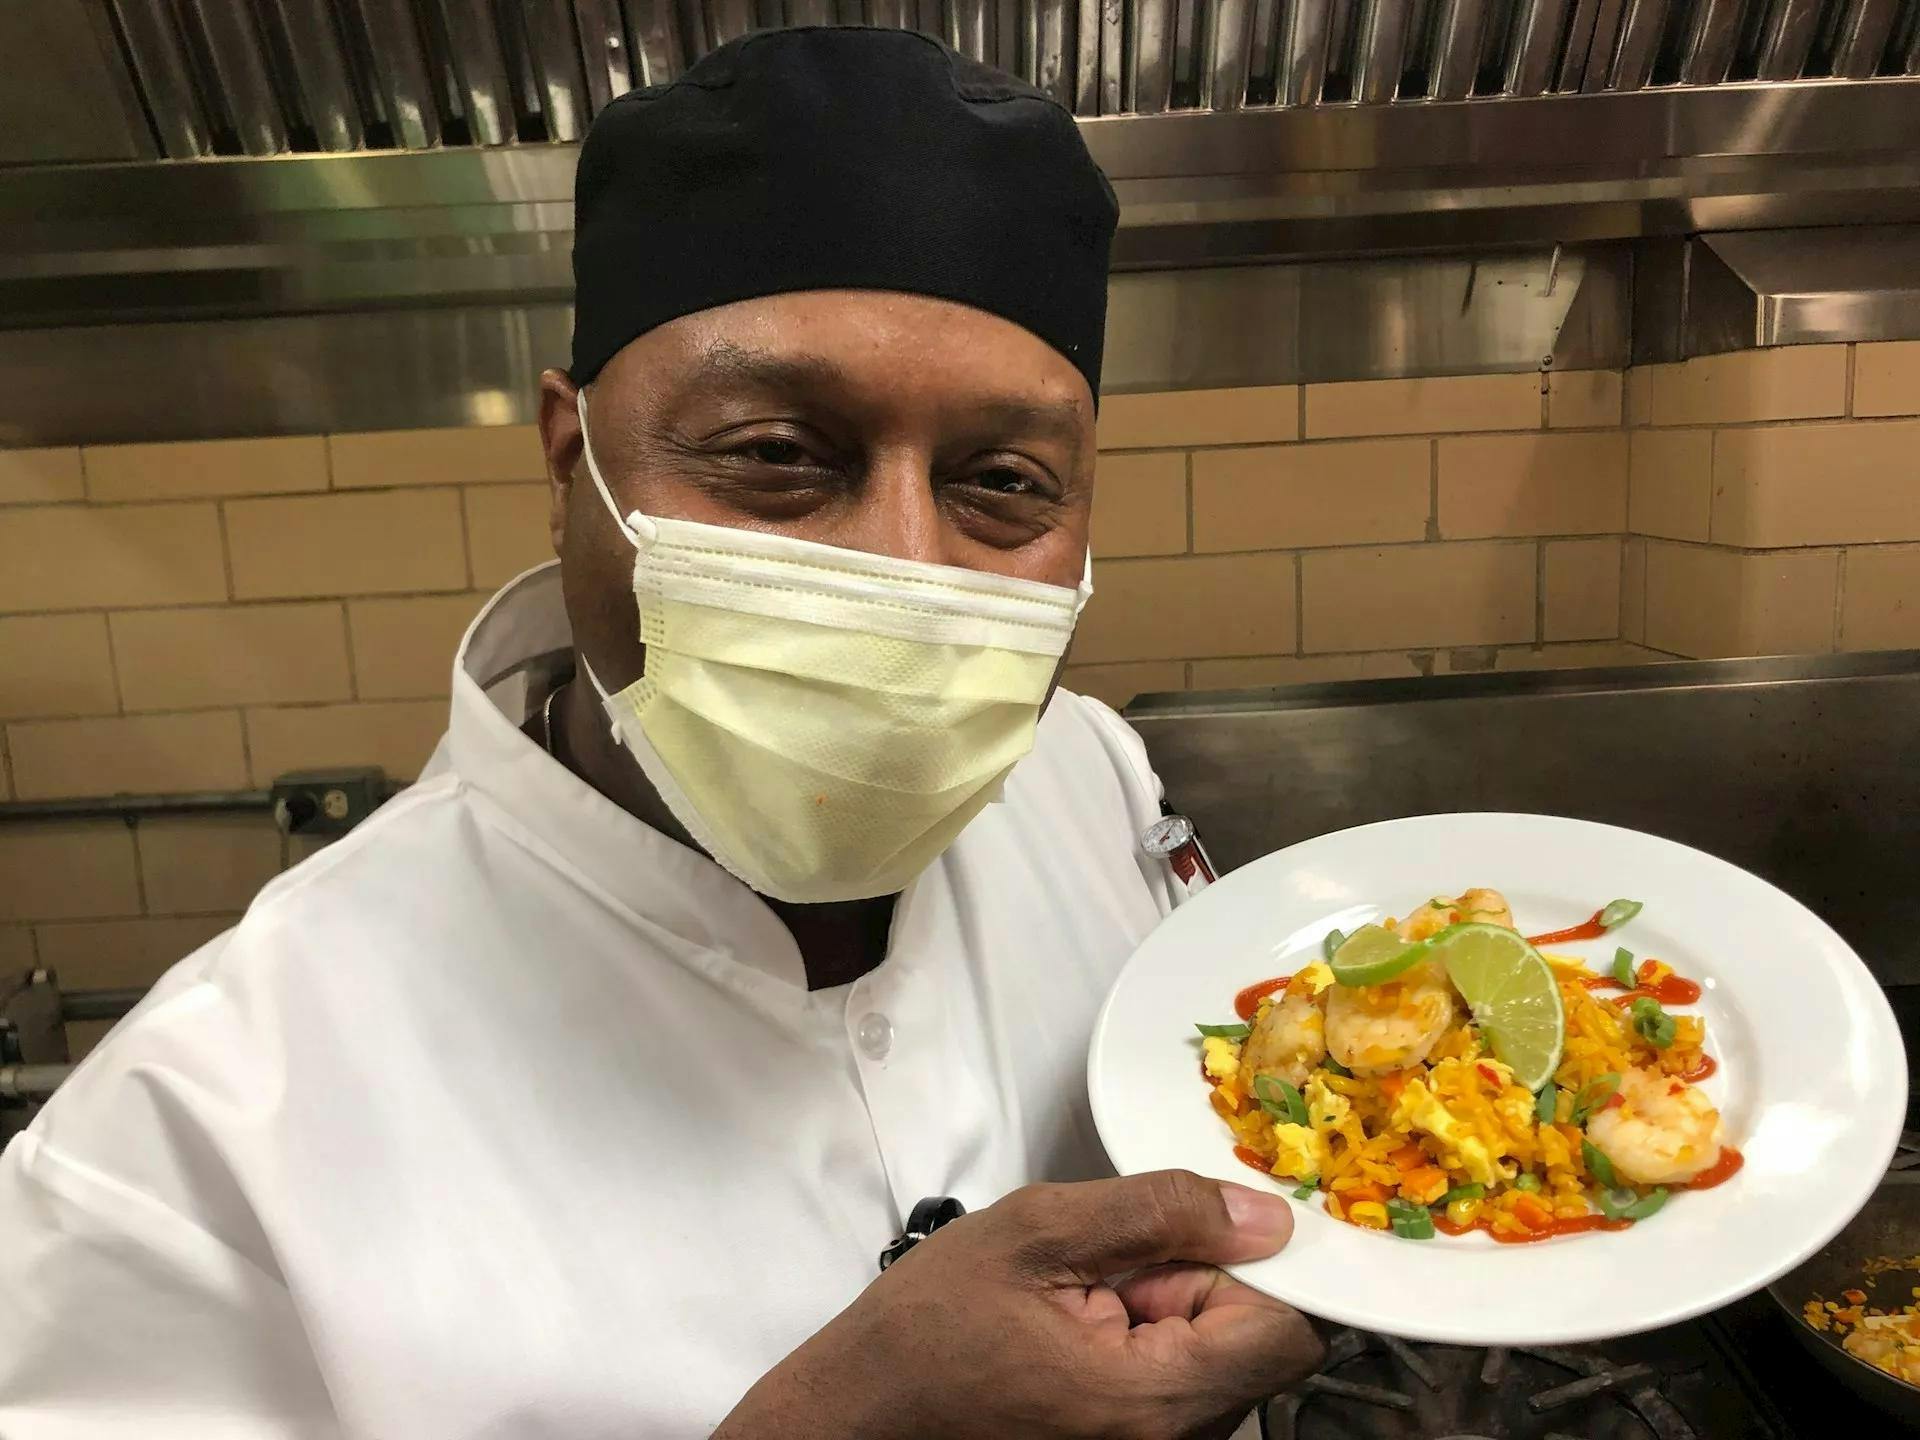 WellSpan chef blazes his own path to health, success in the kitchen